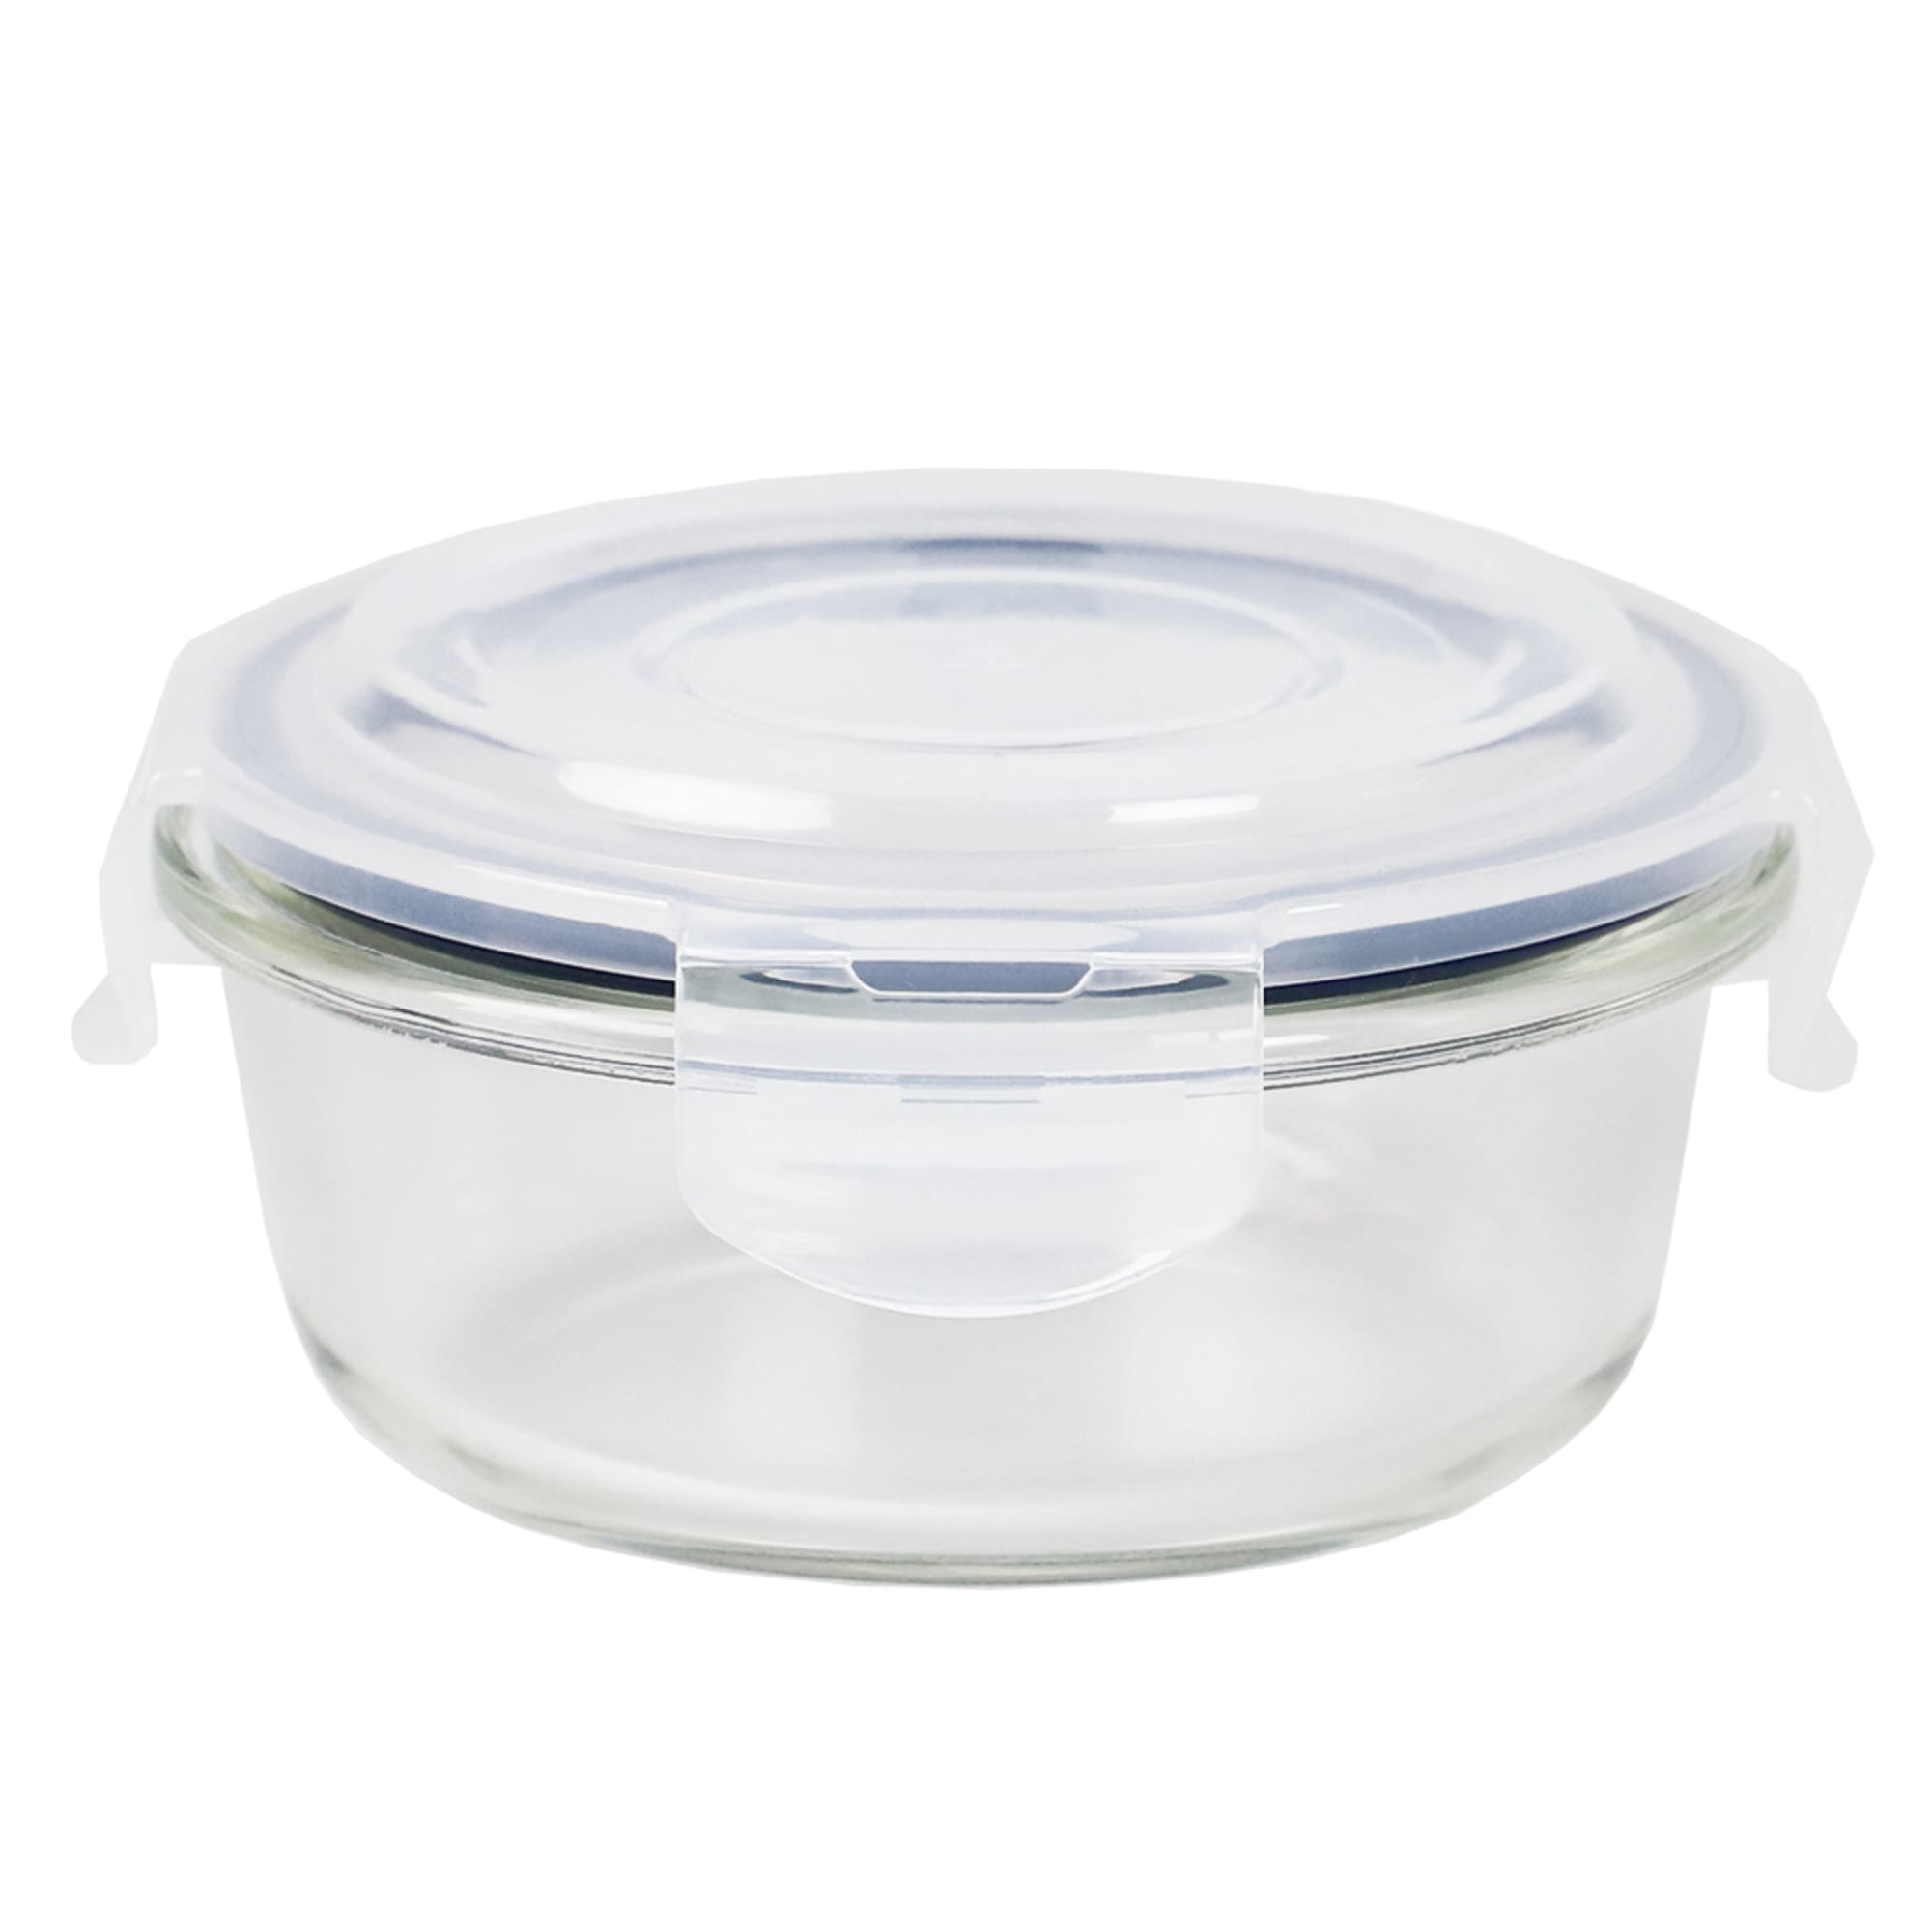 Michael Graves Design 13 Ounce High Borosilicate Glass Round Food Storage Container with Indigo Rubber Seal $3.00 EACH, CASE PACK OF 12